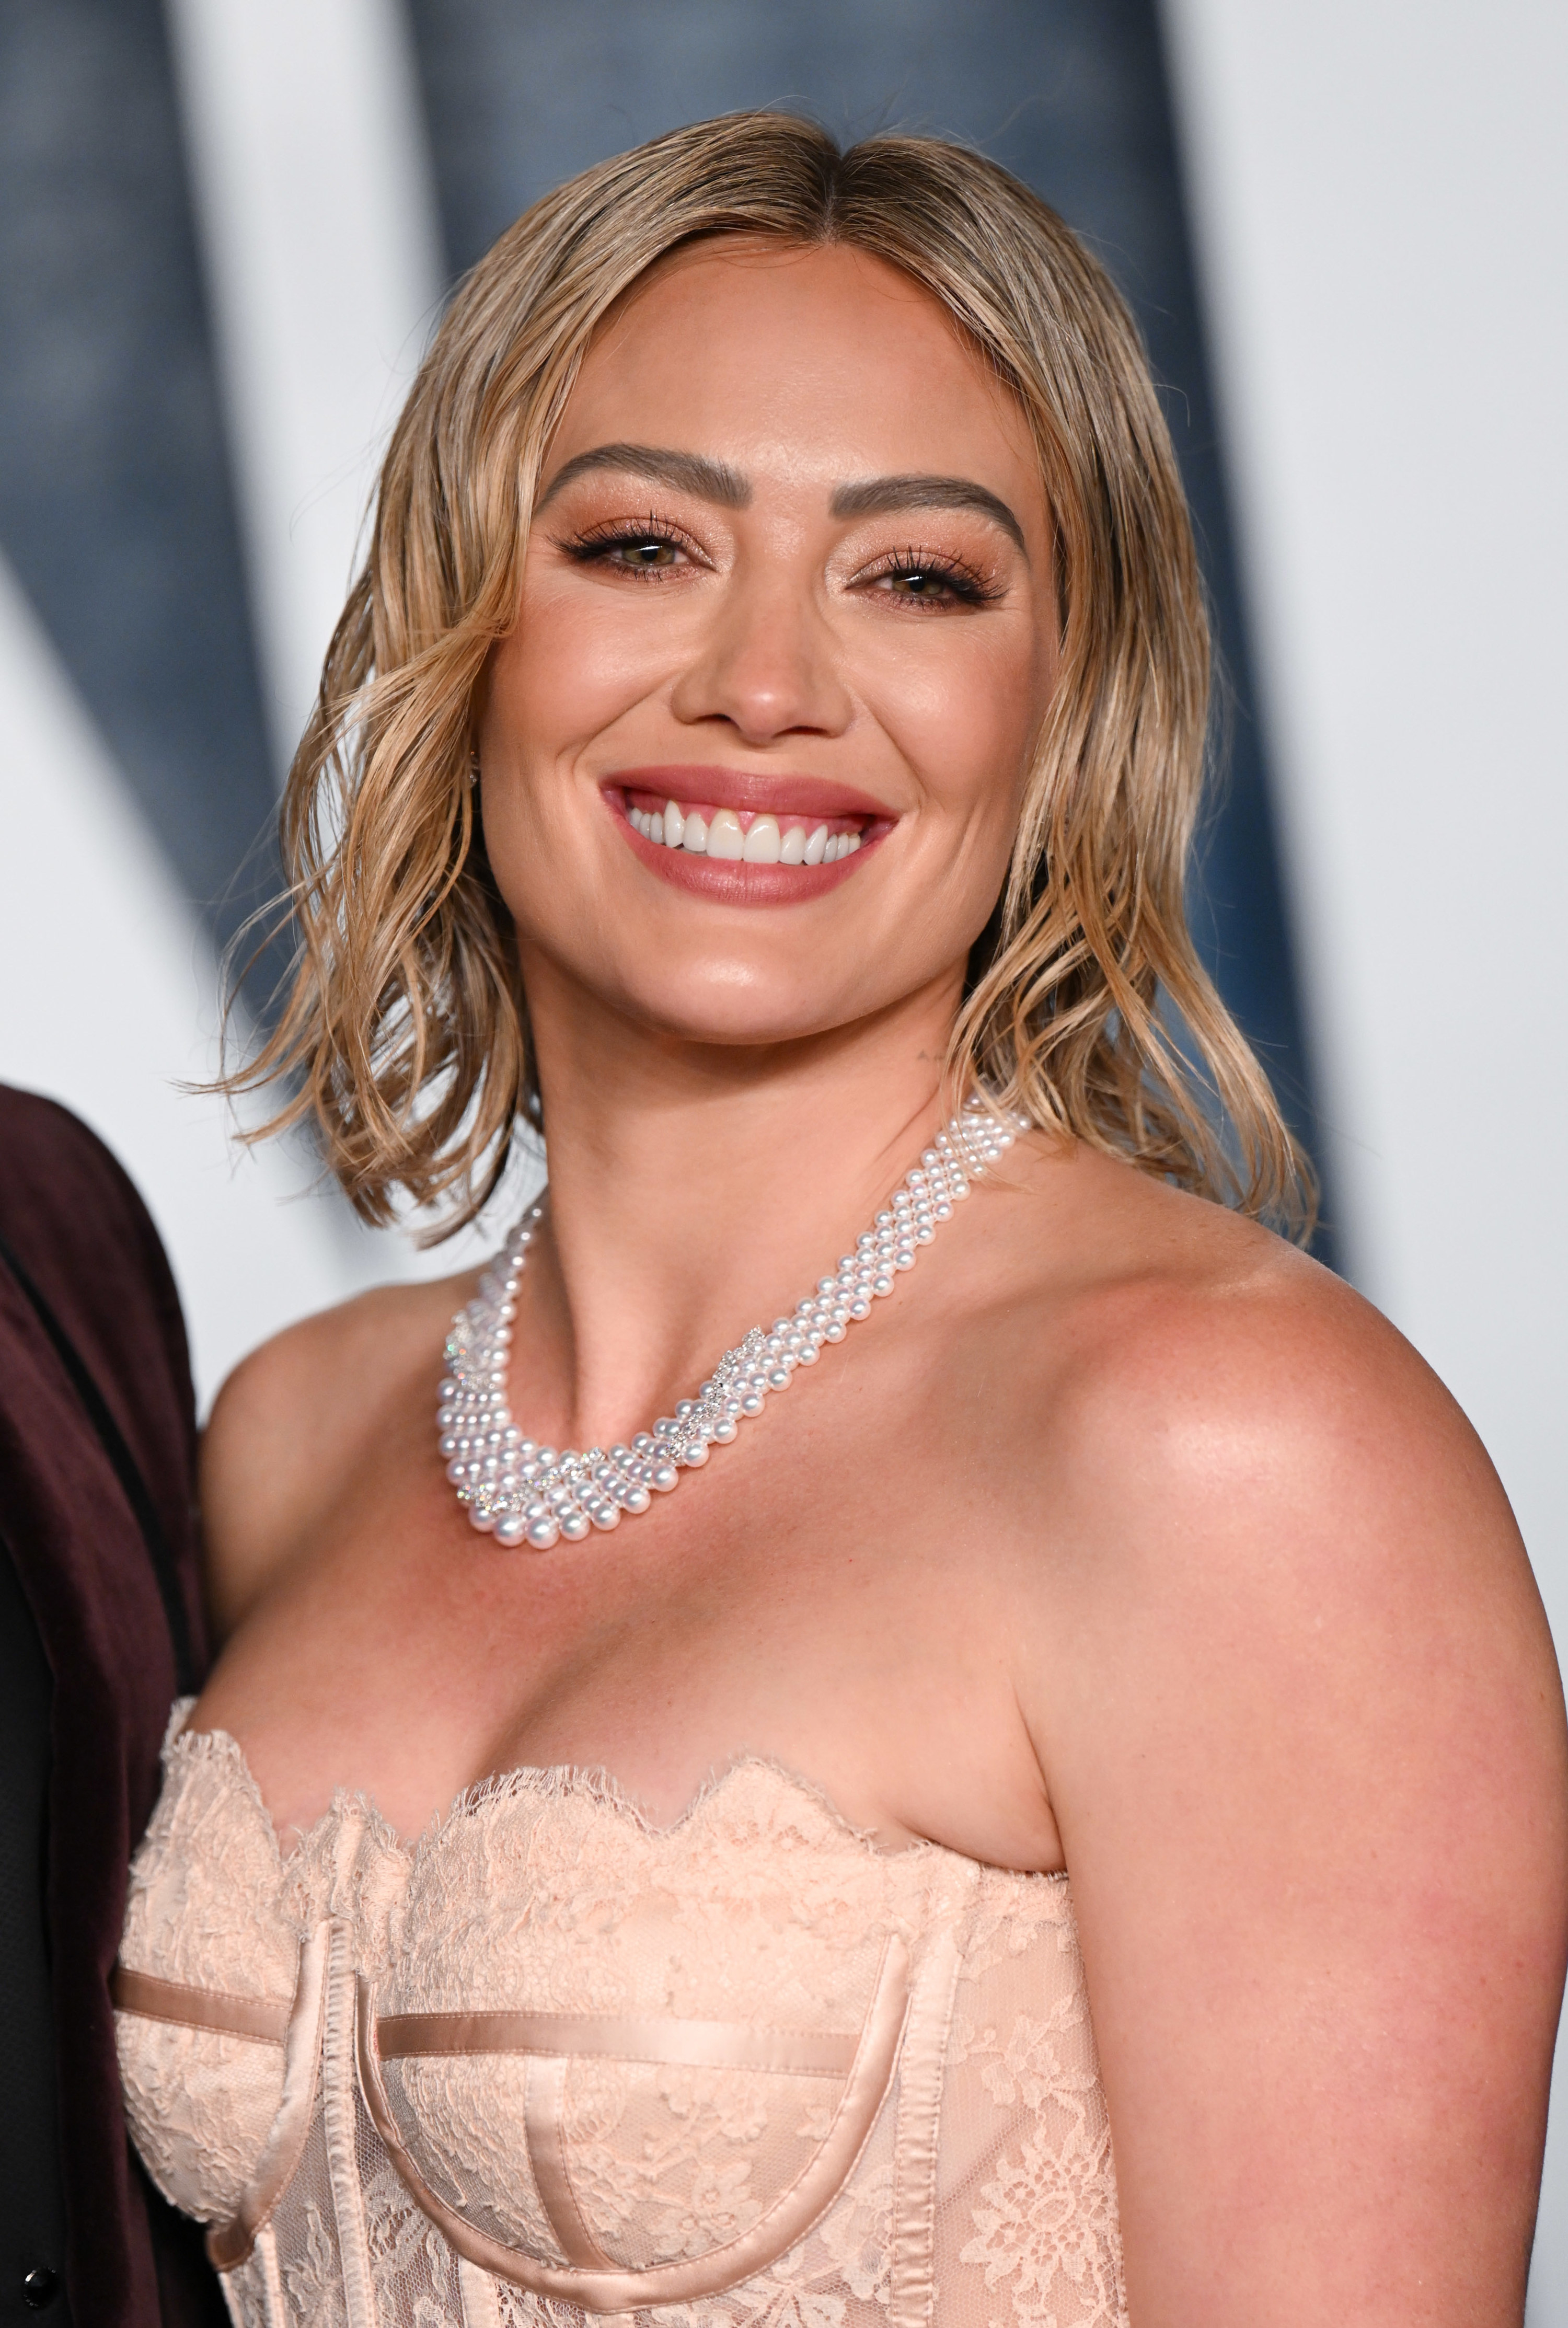 Hilary Duff is photographed at the Vanity Fair Oscar Party on March 12, 2023